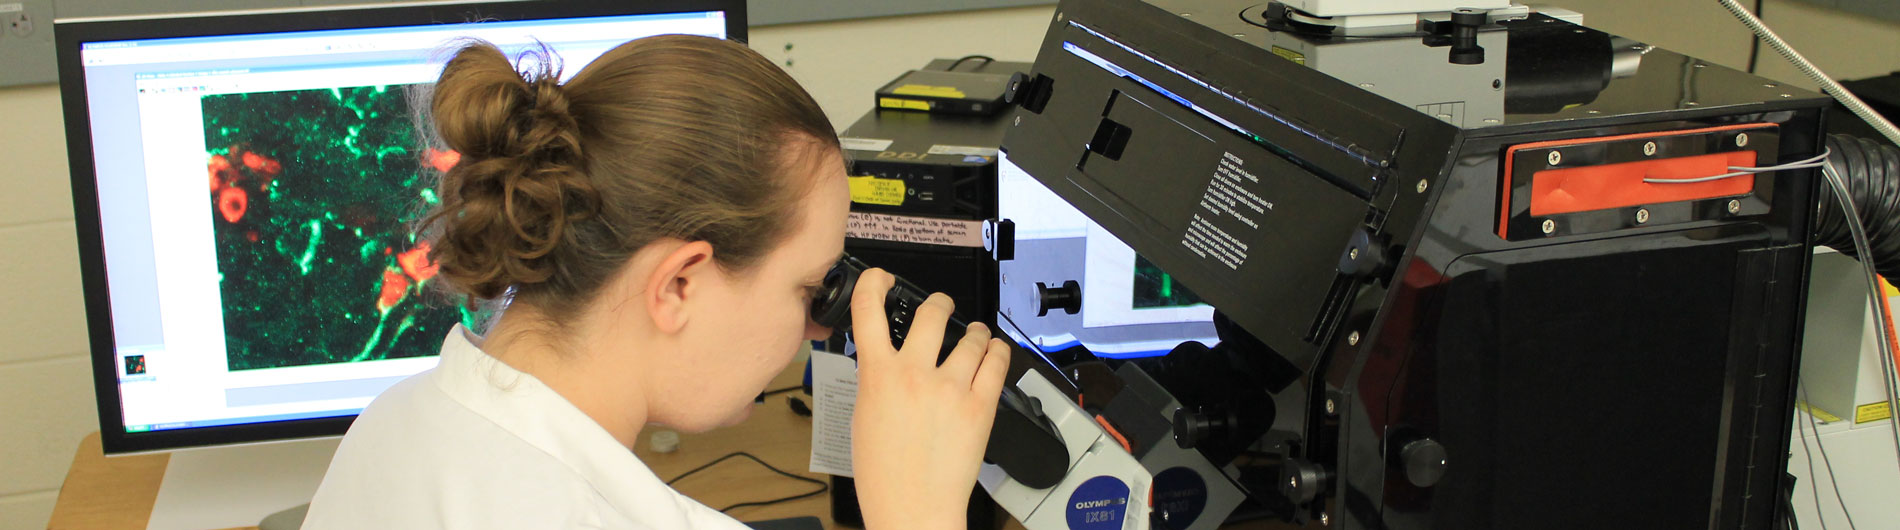 Photo of technician working on confocal microscope